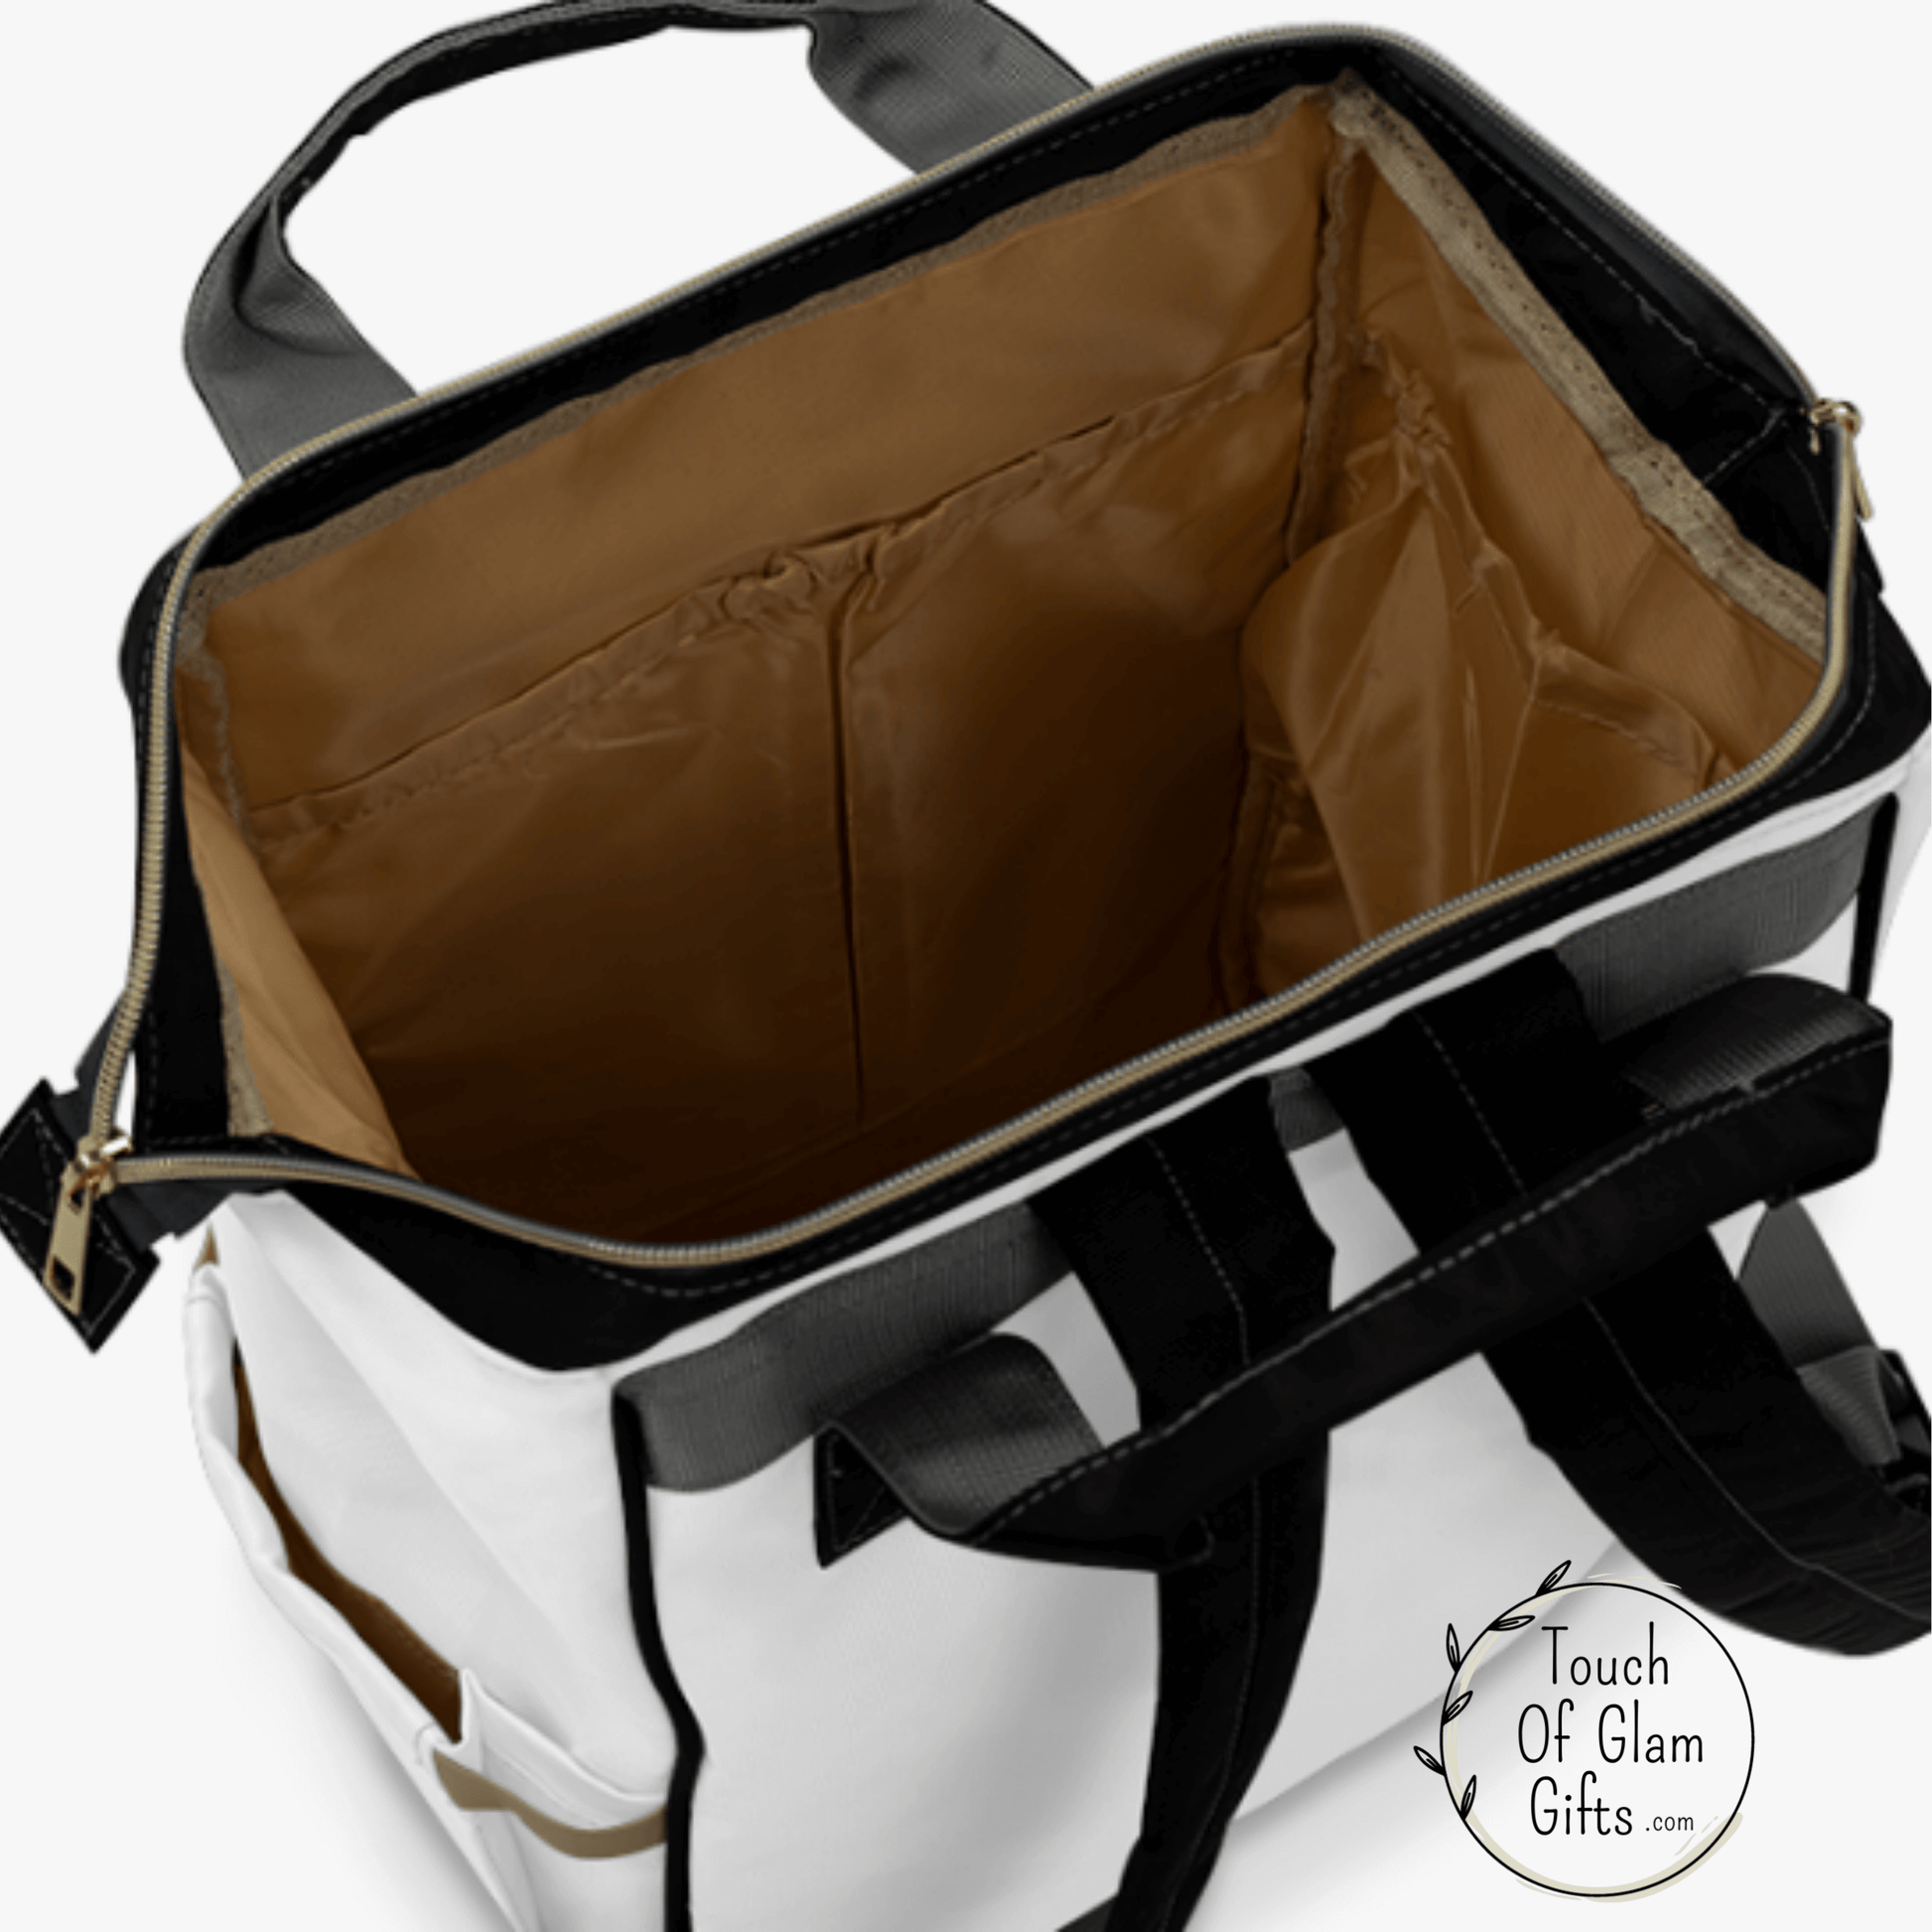 The inside of the bag is tan colored and the zipper opens the backpack wide and it stands up on its own.